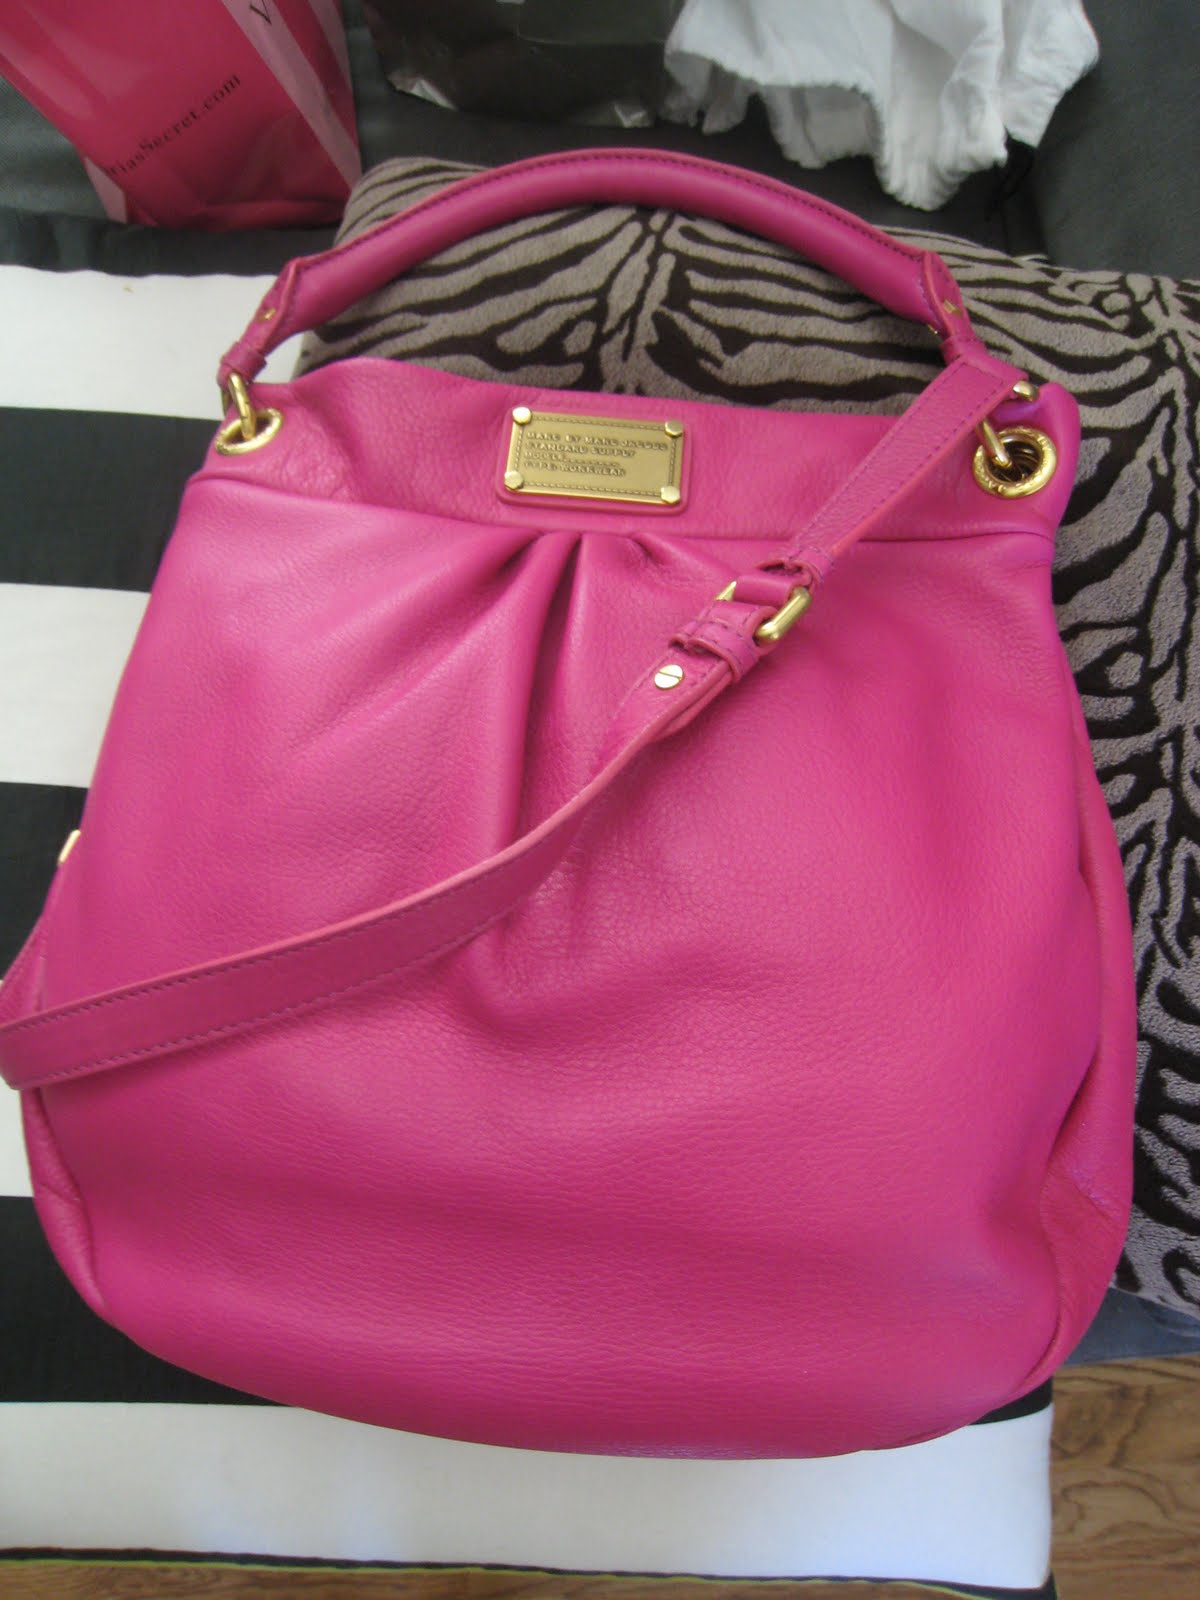 ... today at the Houston Galleria and got my lovely bag...and here it is